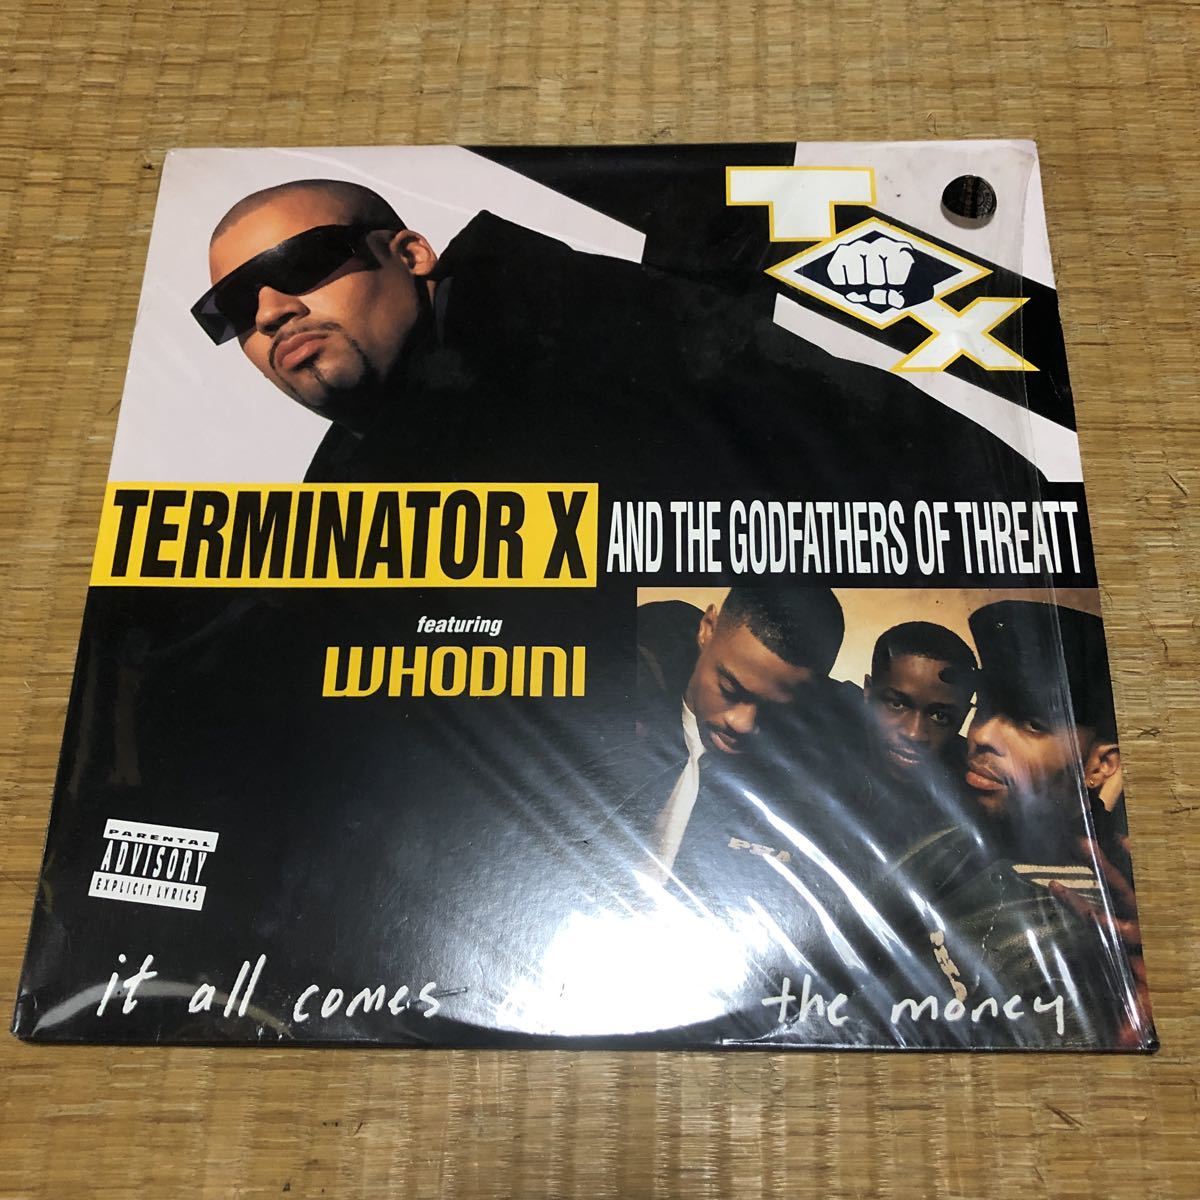 Terminator X & The Godfathers Of Threatt Featuring Whodini It All Comes Down To The Money USA盤レコード【12インチシングル】_画像1